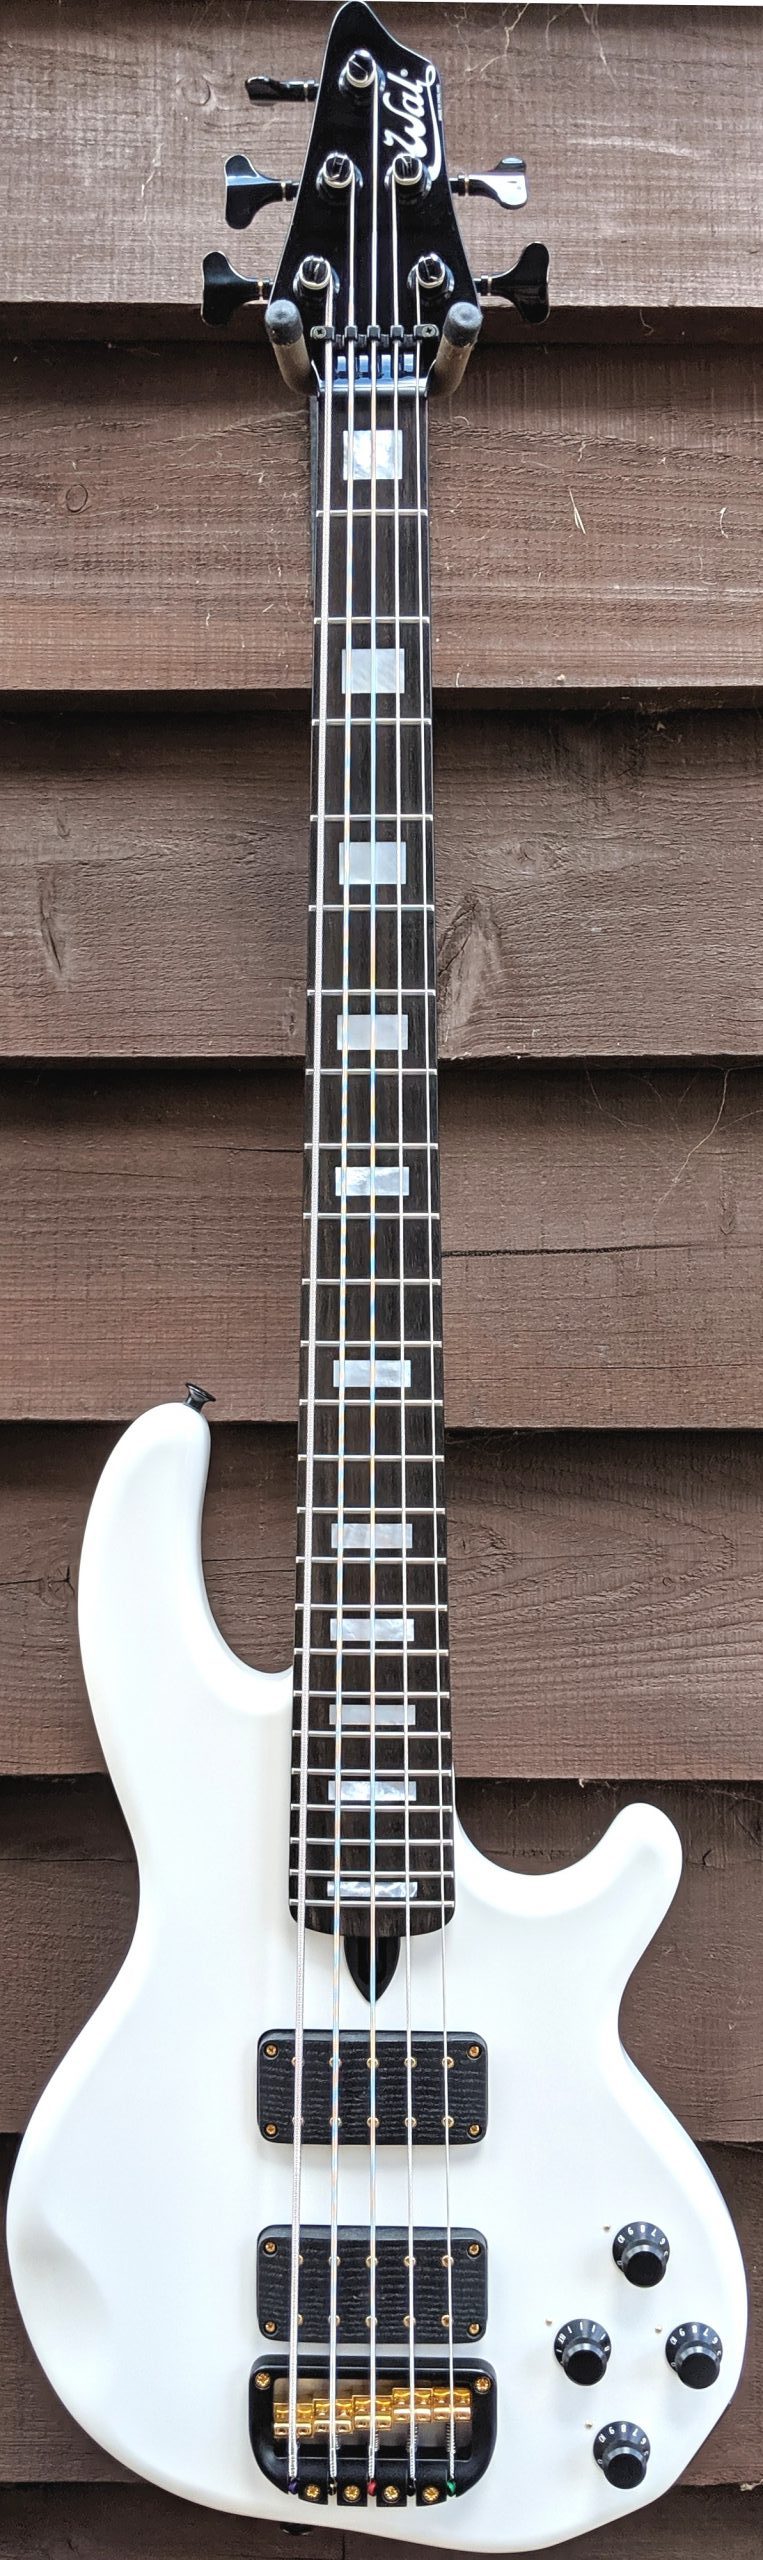 5-string Mk3 with gloss white body, gloss black neck, an ebony fingerboard with MOP block inlays, gold hardware and black tuners & retainer.